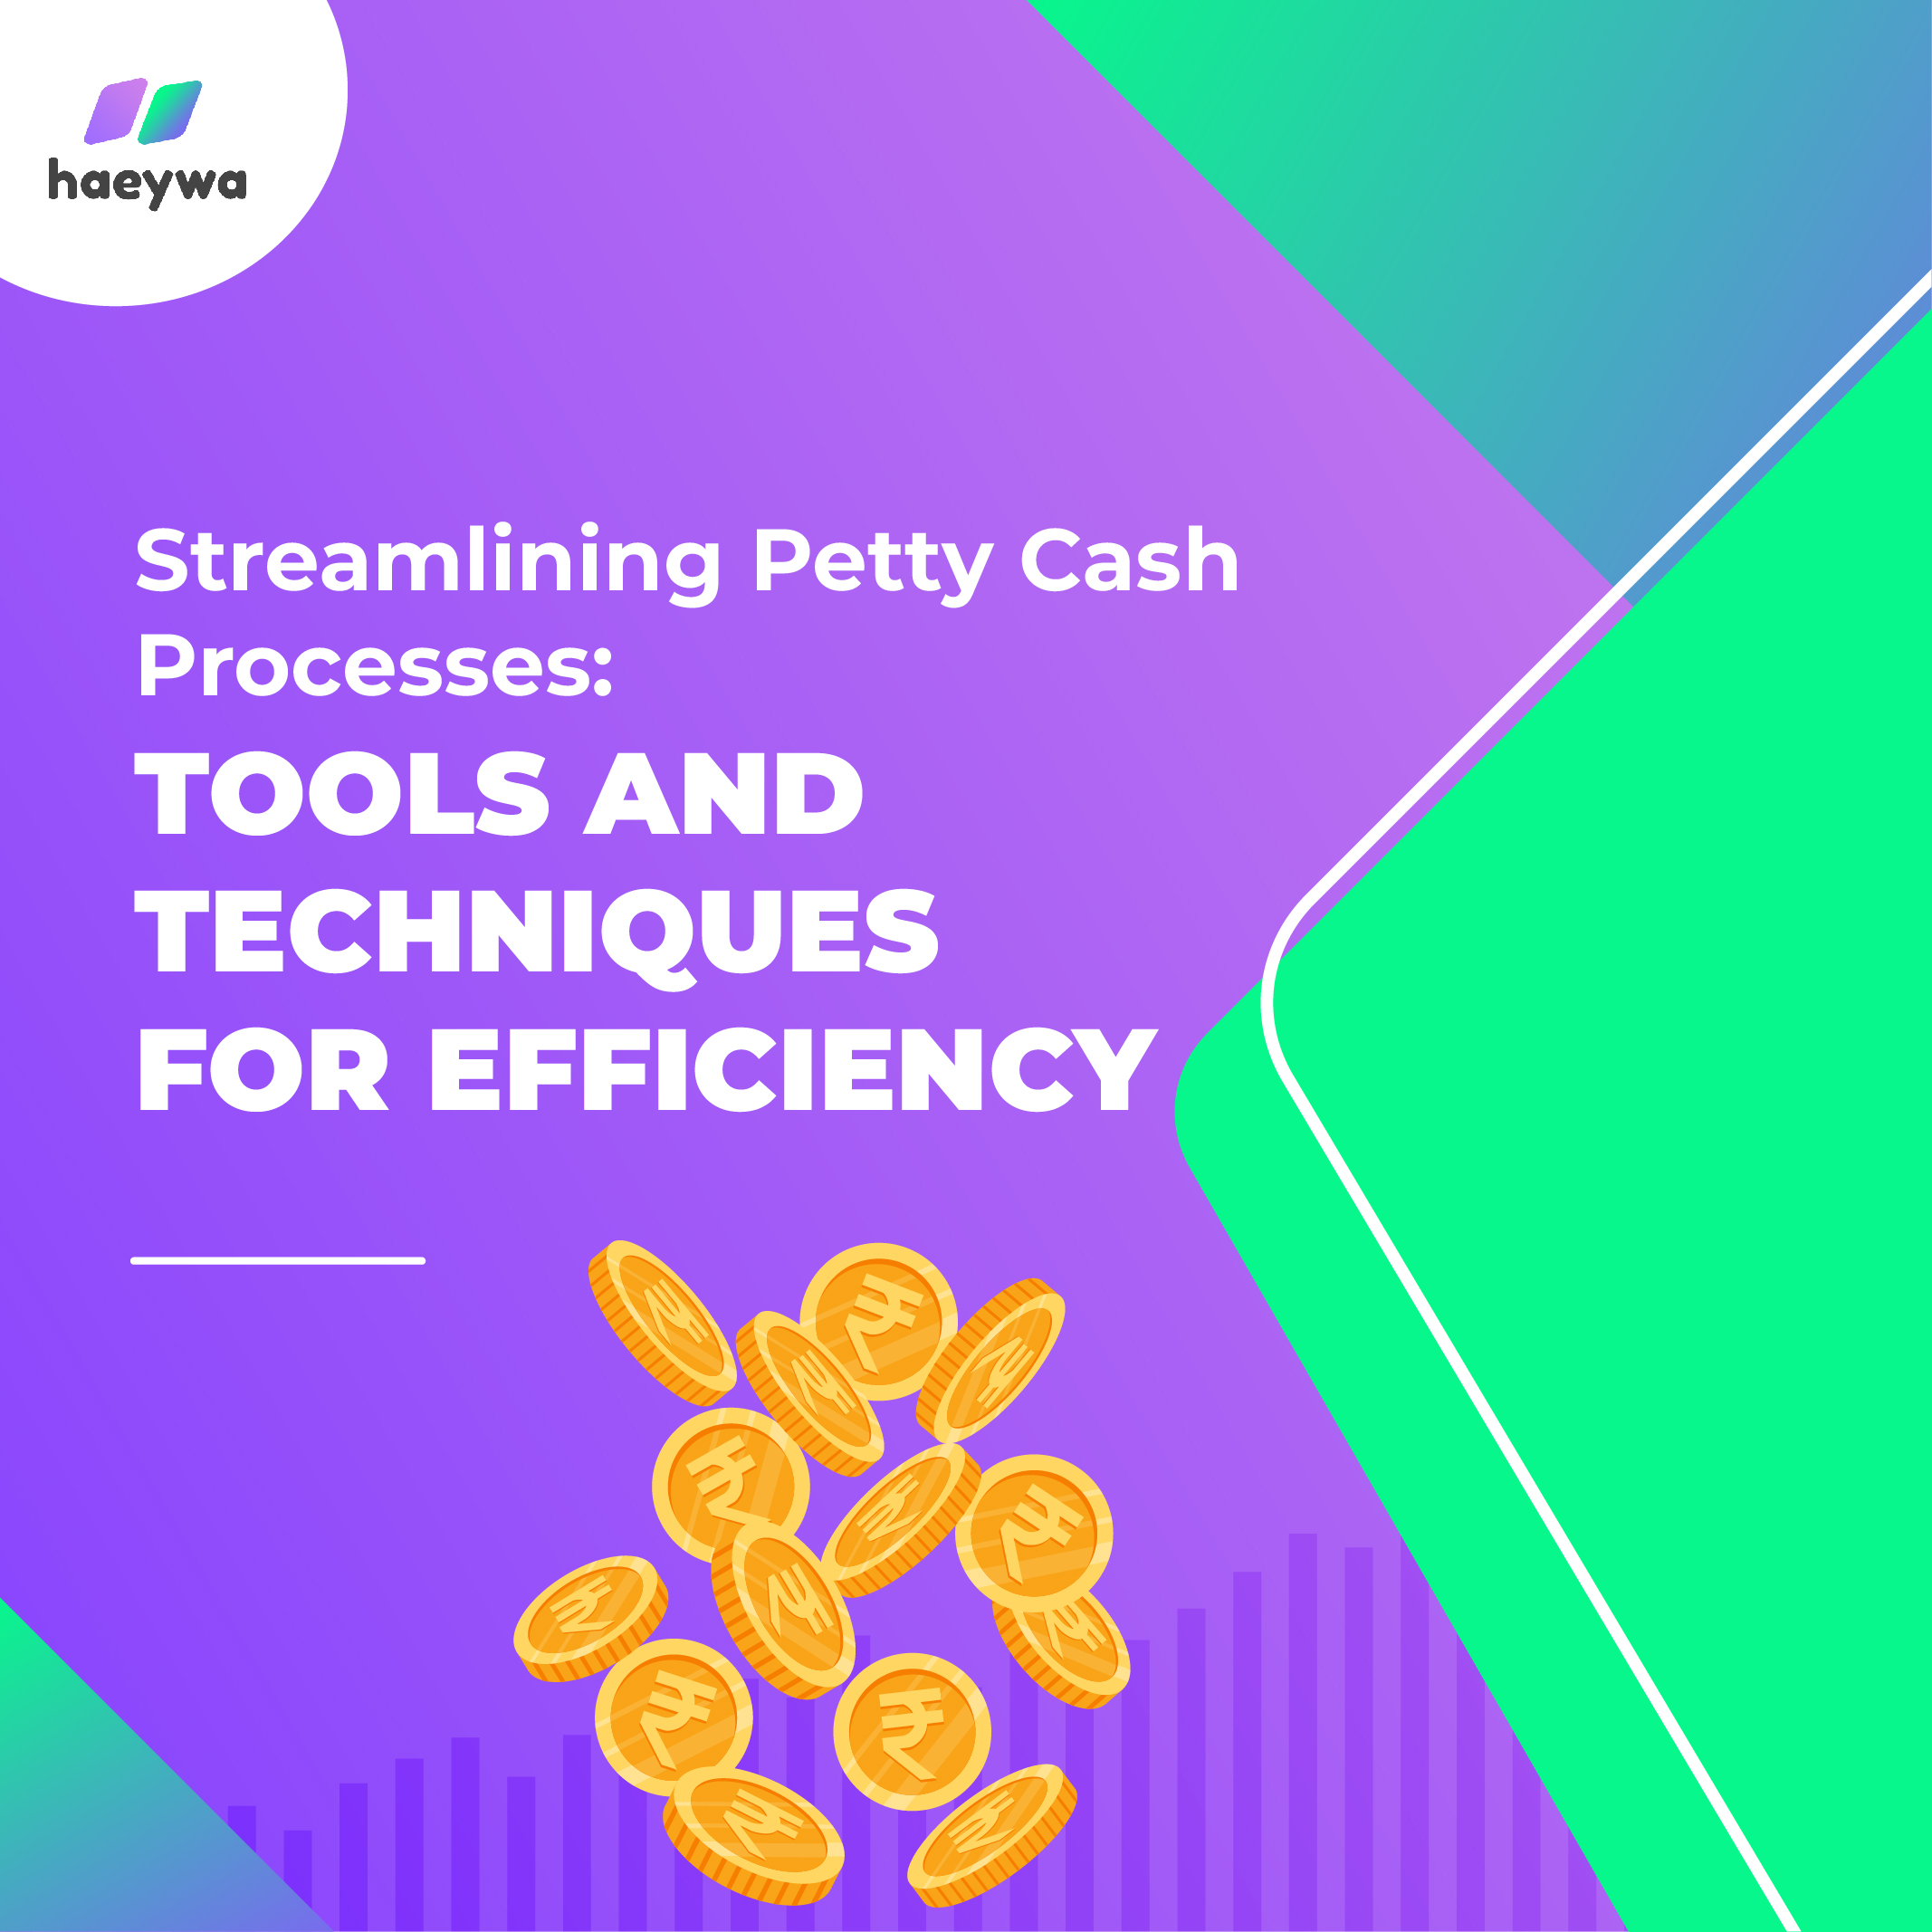 Streamlining Petty Cash Processes: Tools and Techniques for Efficiency